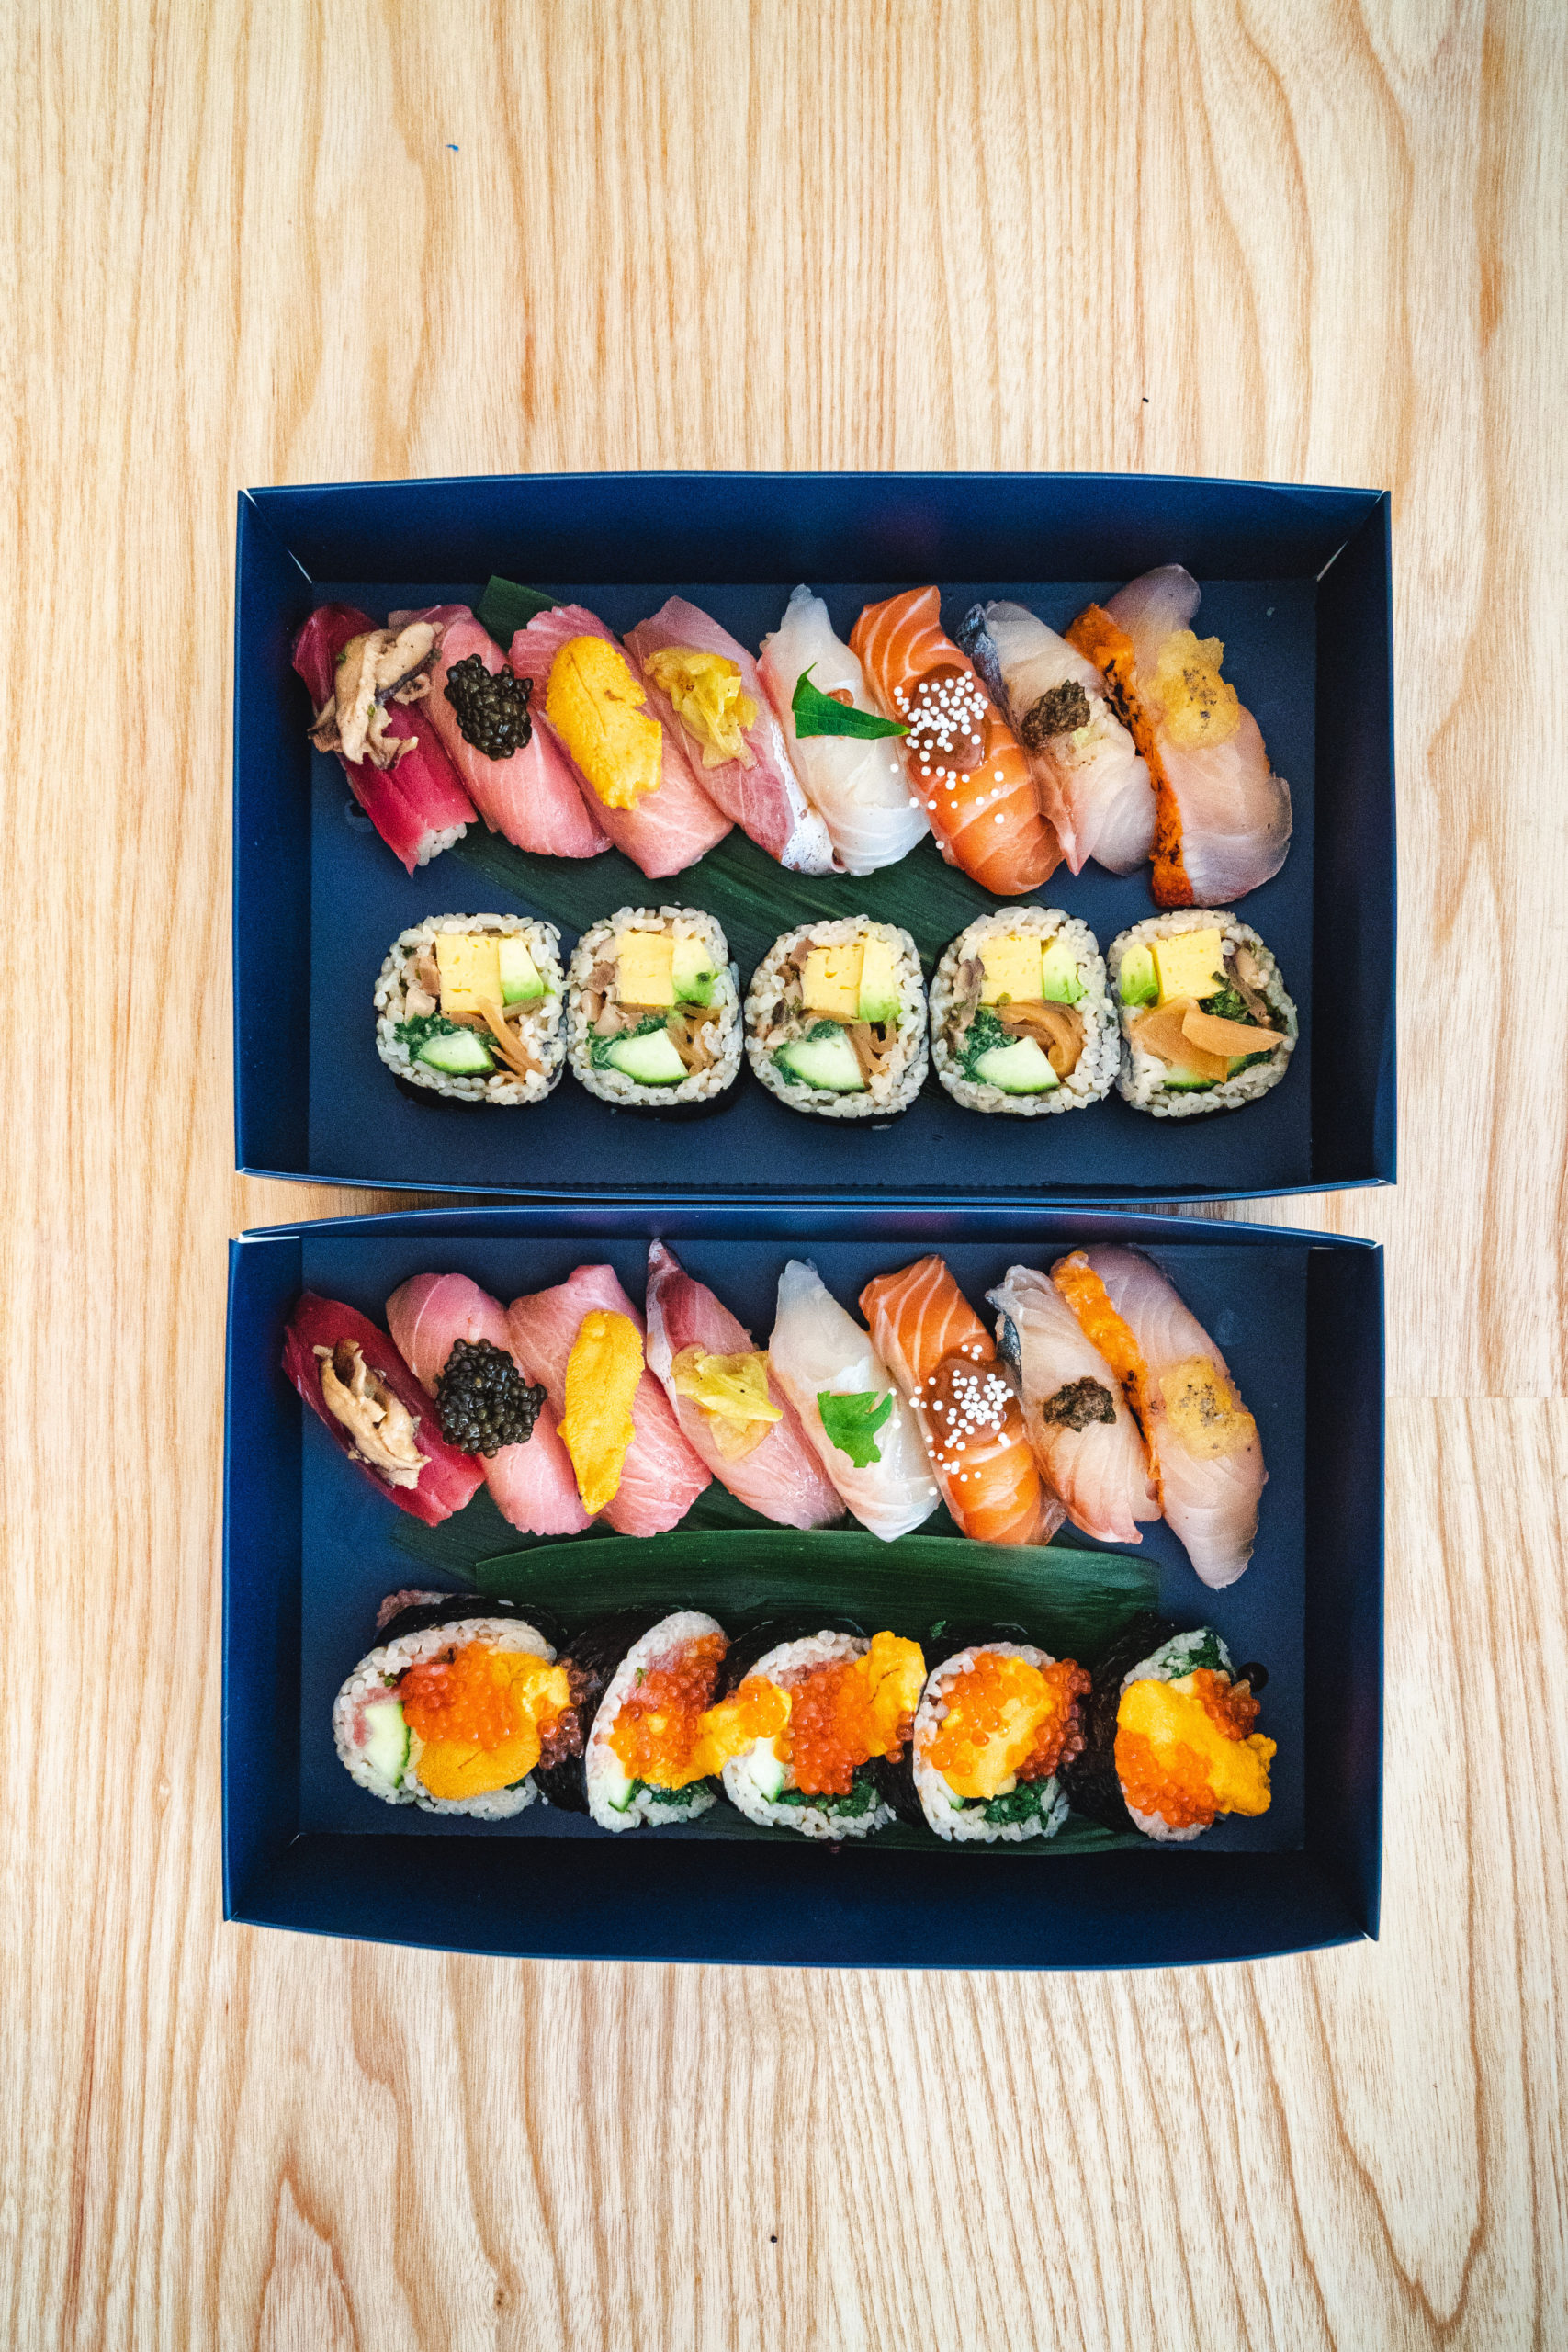 Kissaki’s menu offers its signature premium omakase boxes, specialty rolls and more.